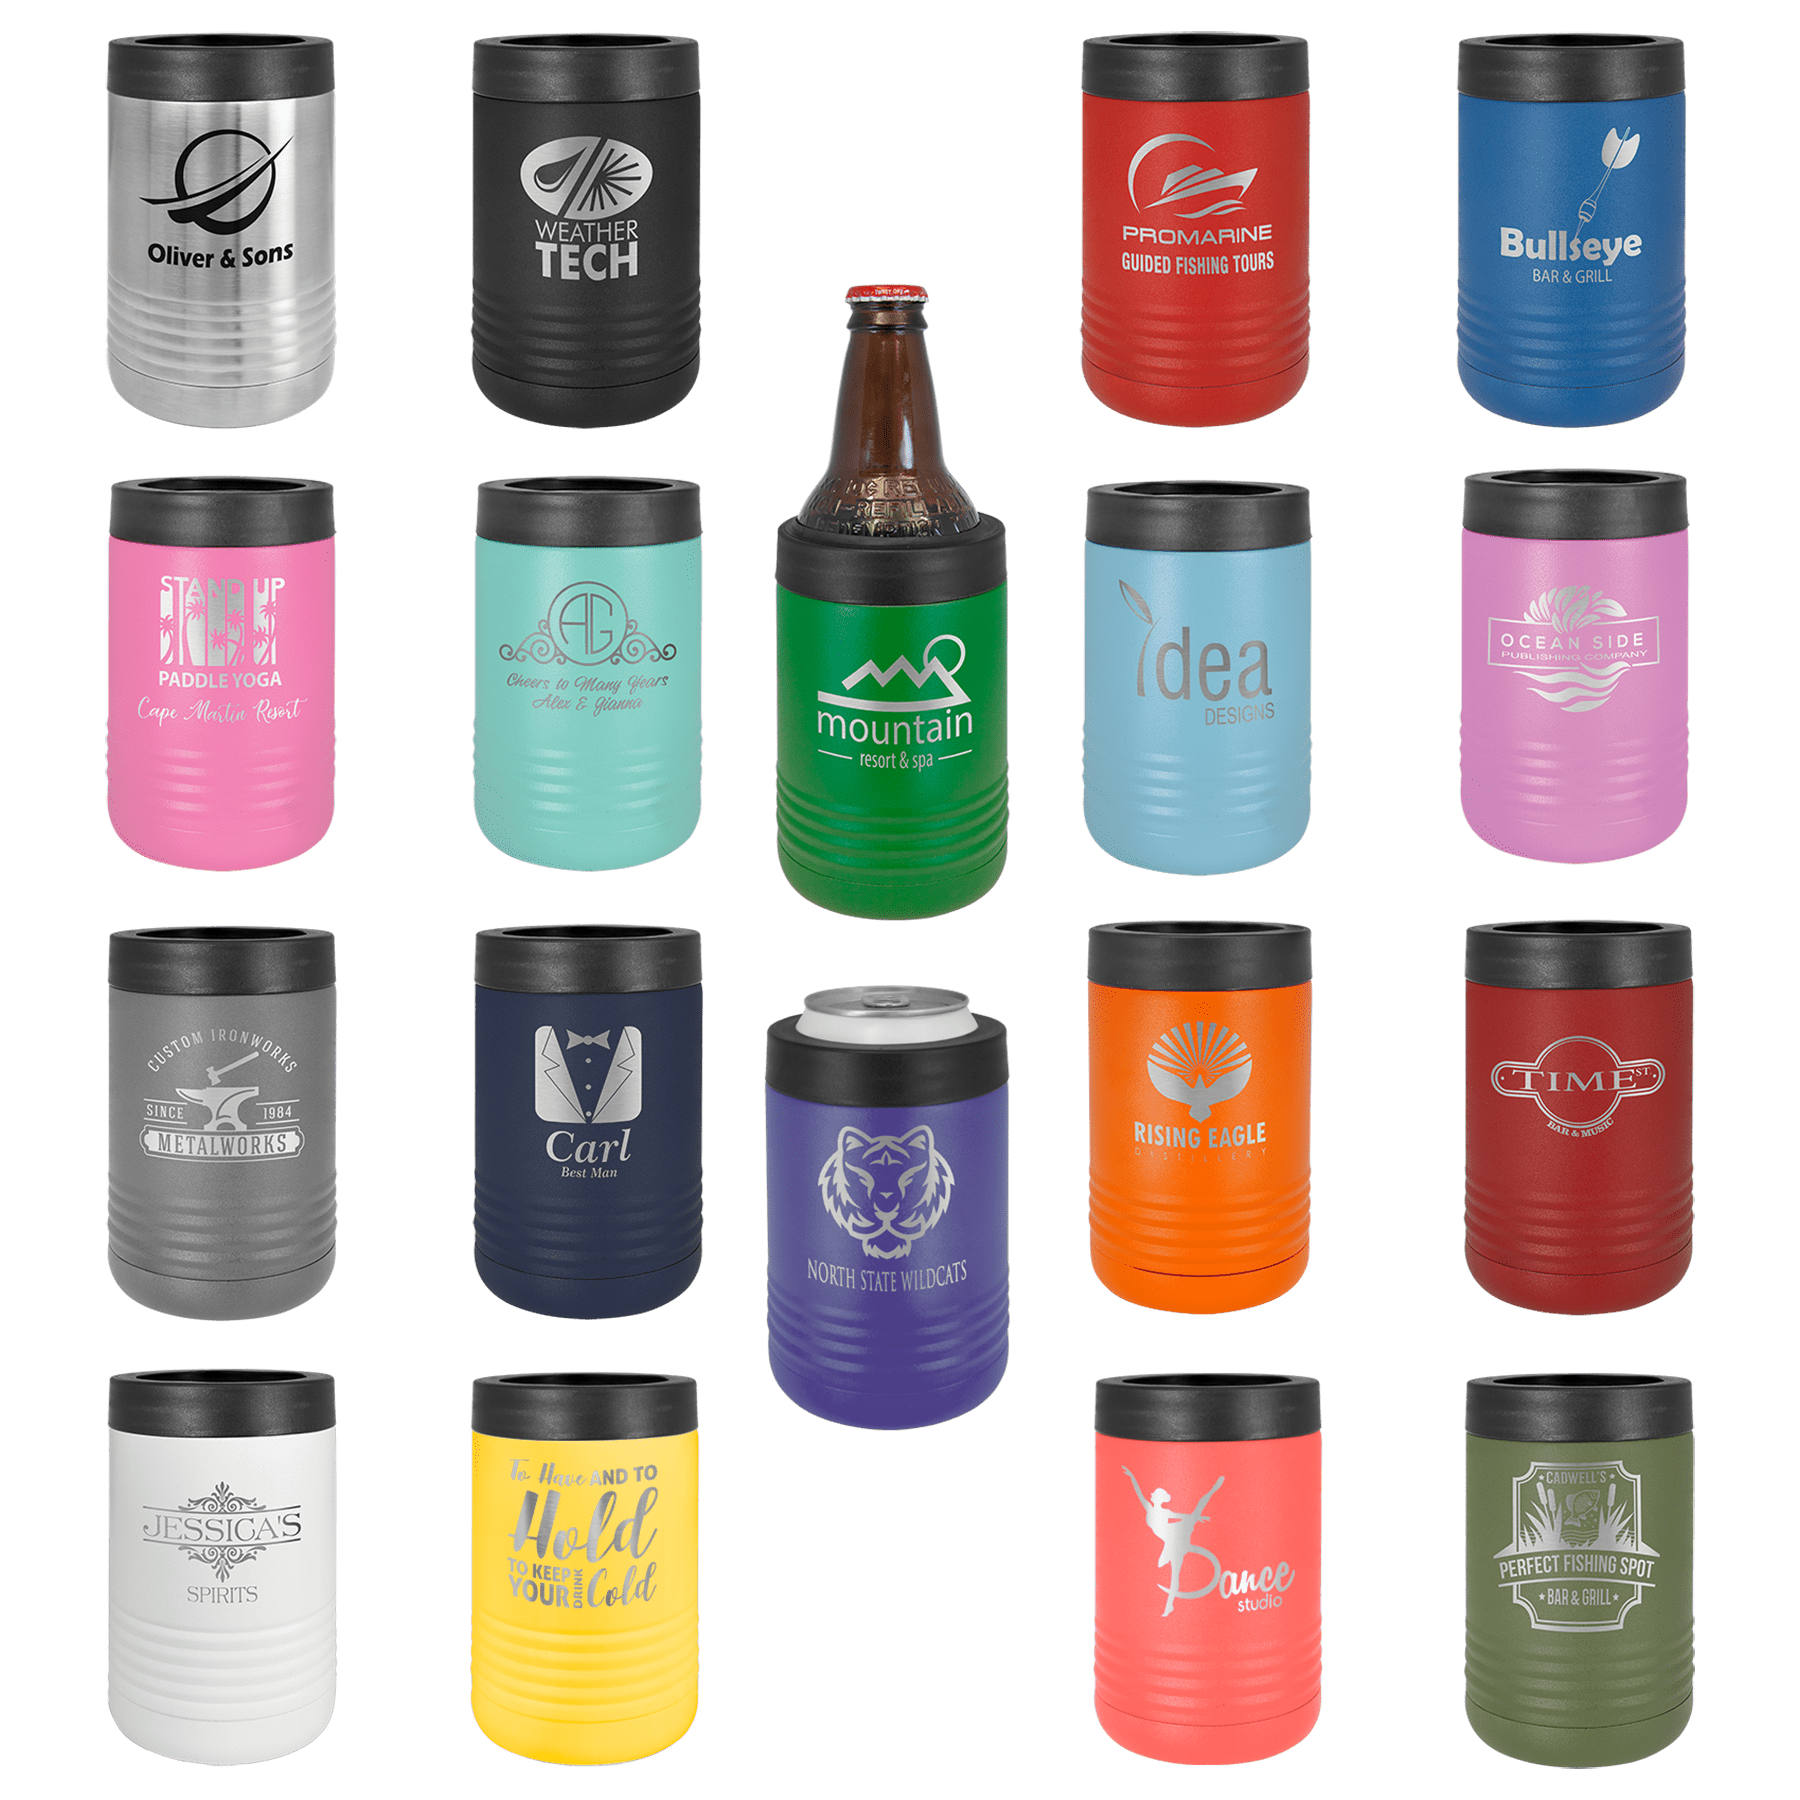 Personalized Beverage Holder Stainless Steel Insulated Business Corporate Gift Event Promotional Idea Wedding Groomsman Gift